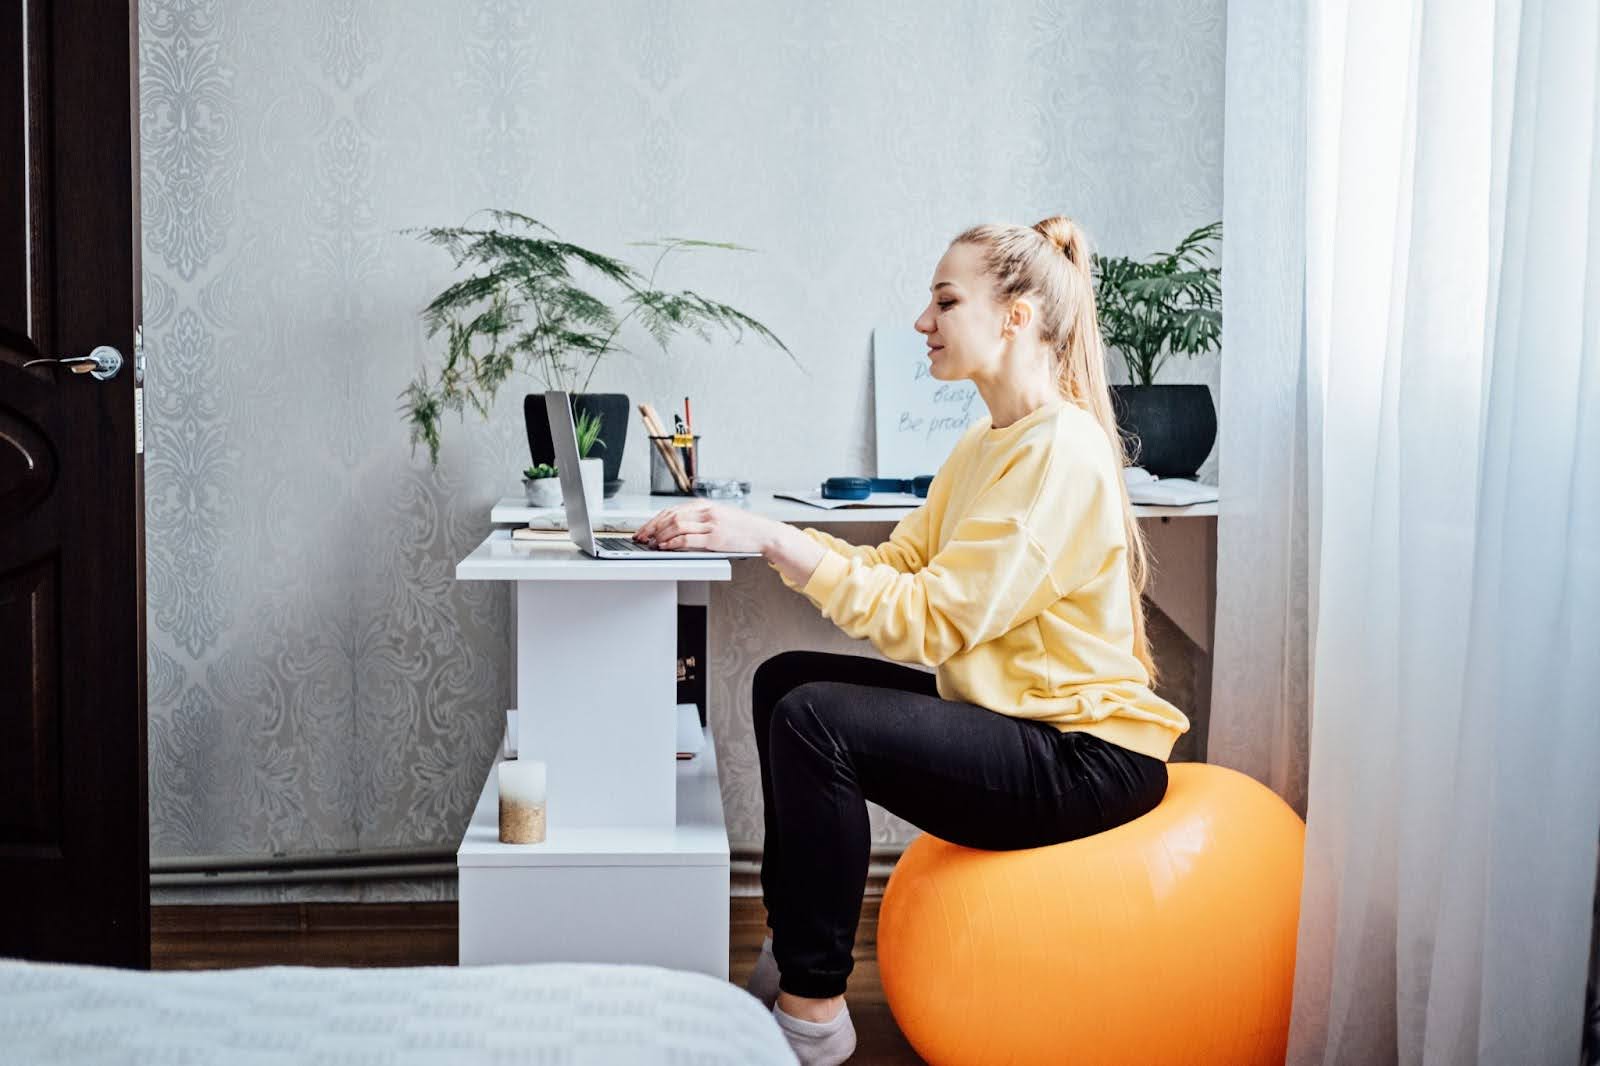 Woman sitting on an exercise ball at work